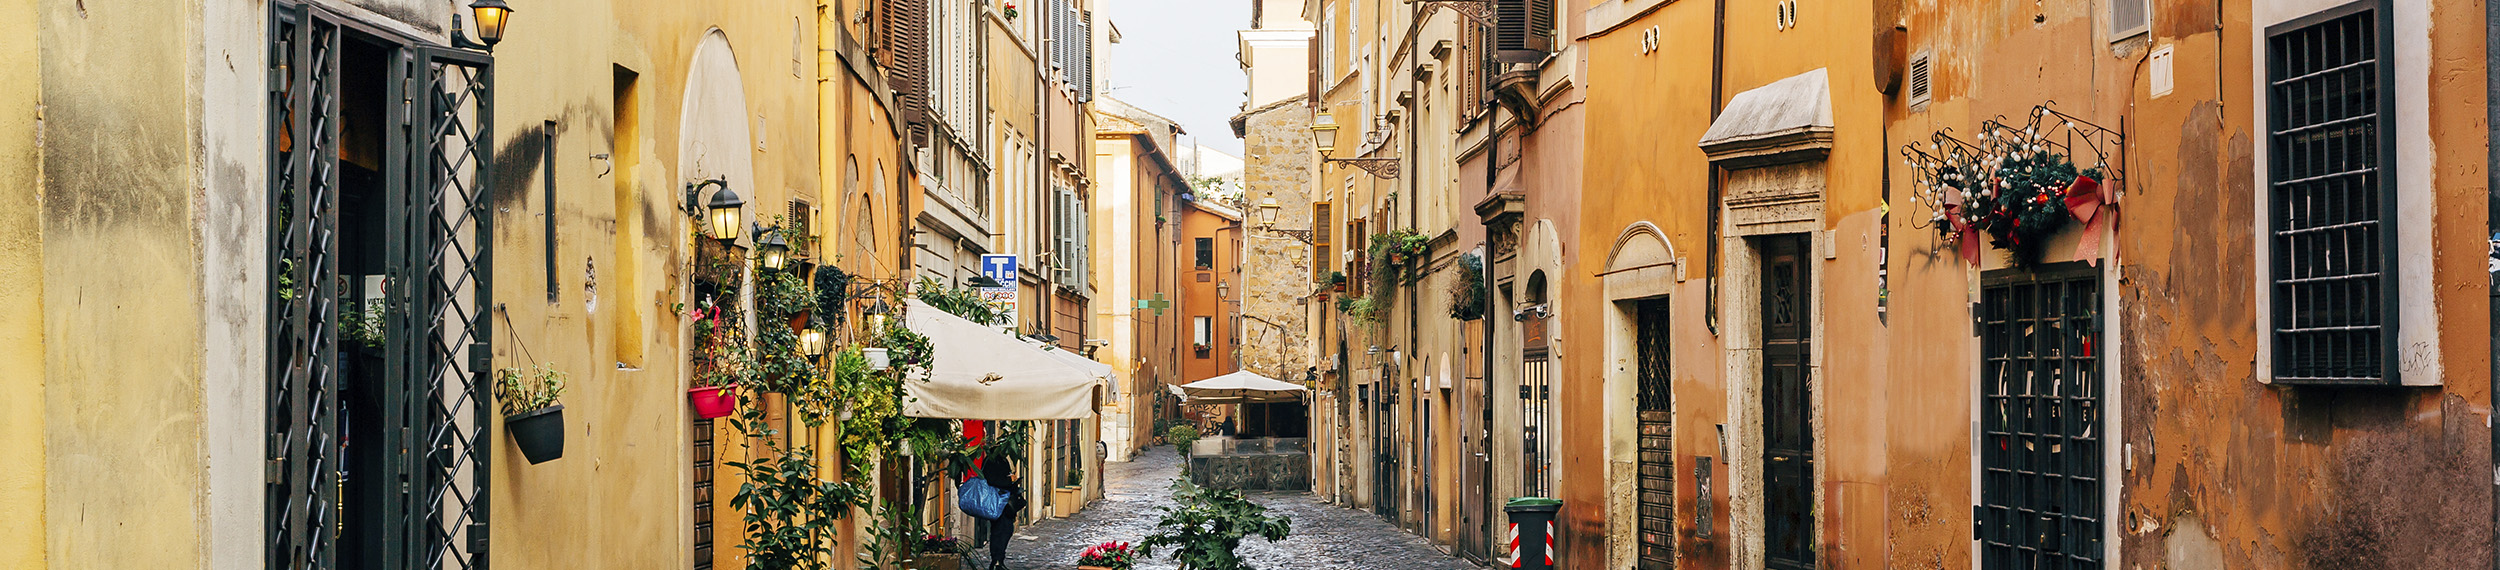 Golden walls, color-filled flower pots, and cobblestones line a street in the Trastevere neighborhood in Rome.